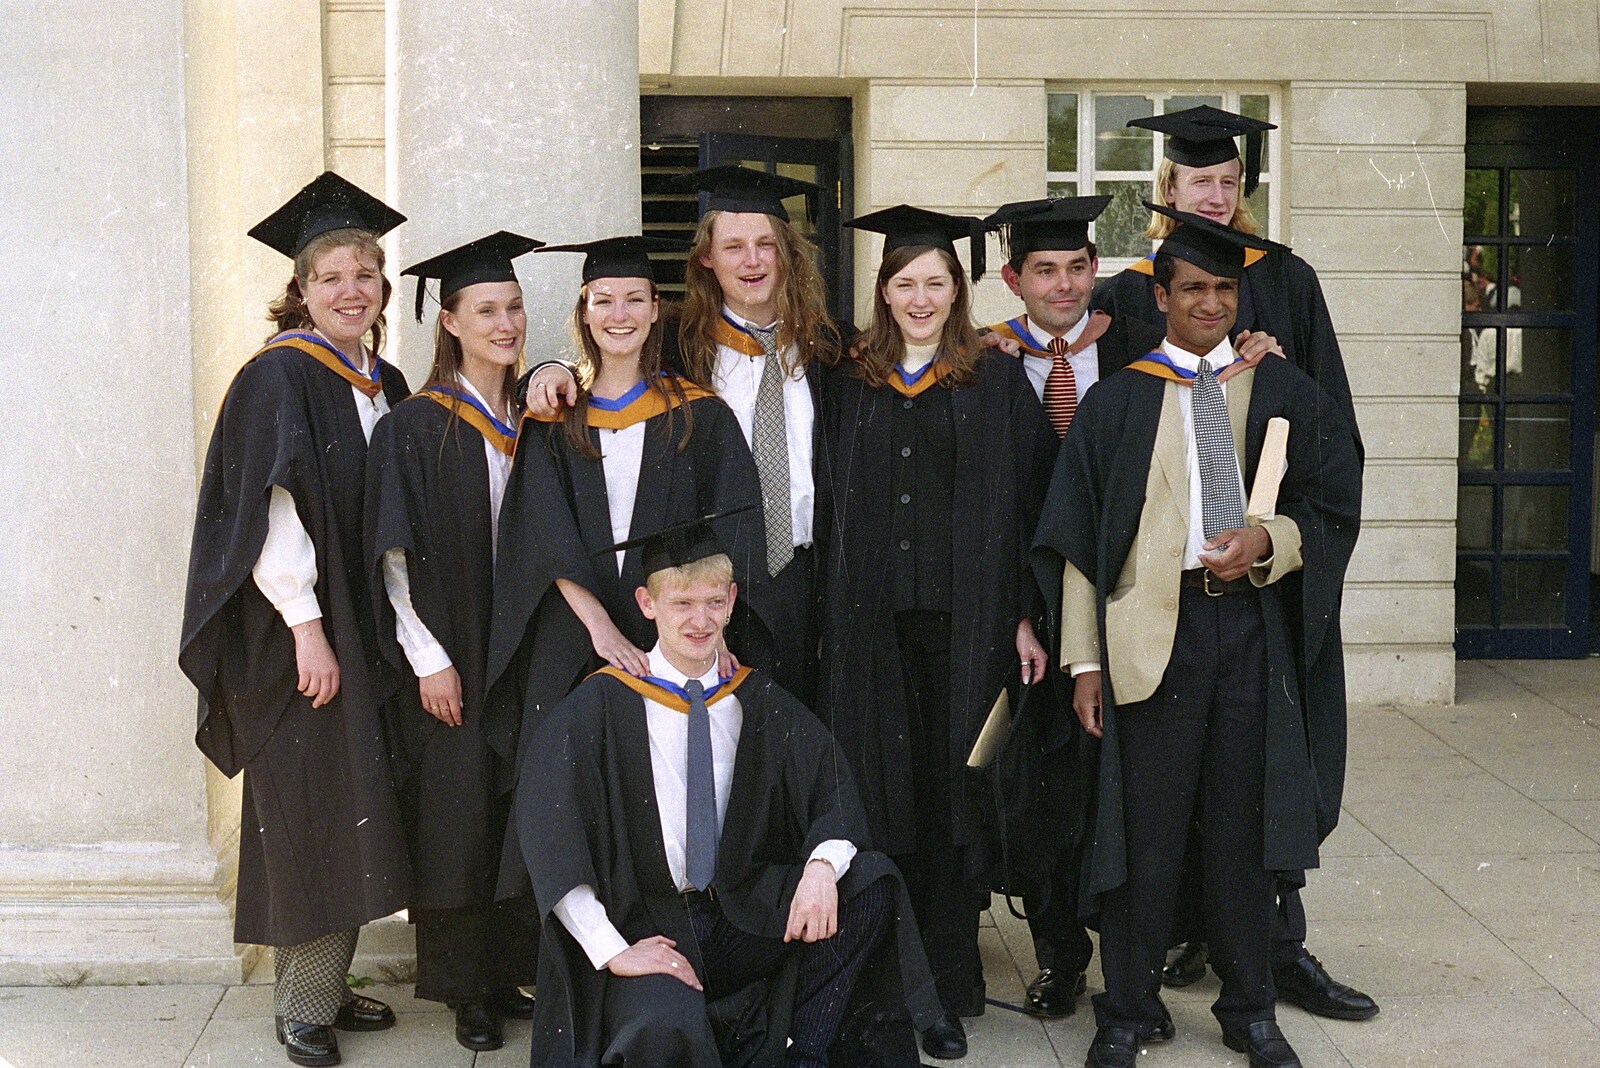 Sis Graduates from De Montfort, Leicester, Leicestershire - 9th August 1997: Sis's group